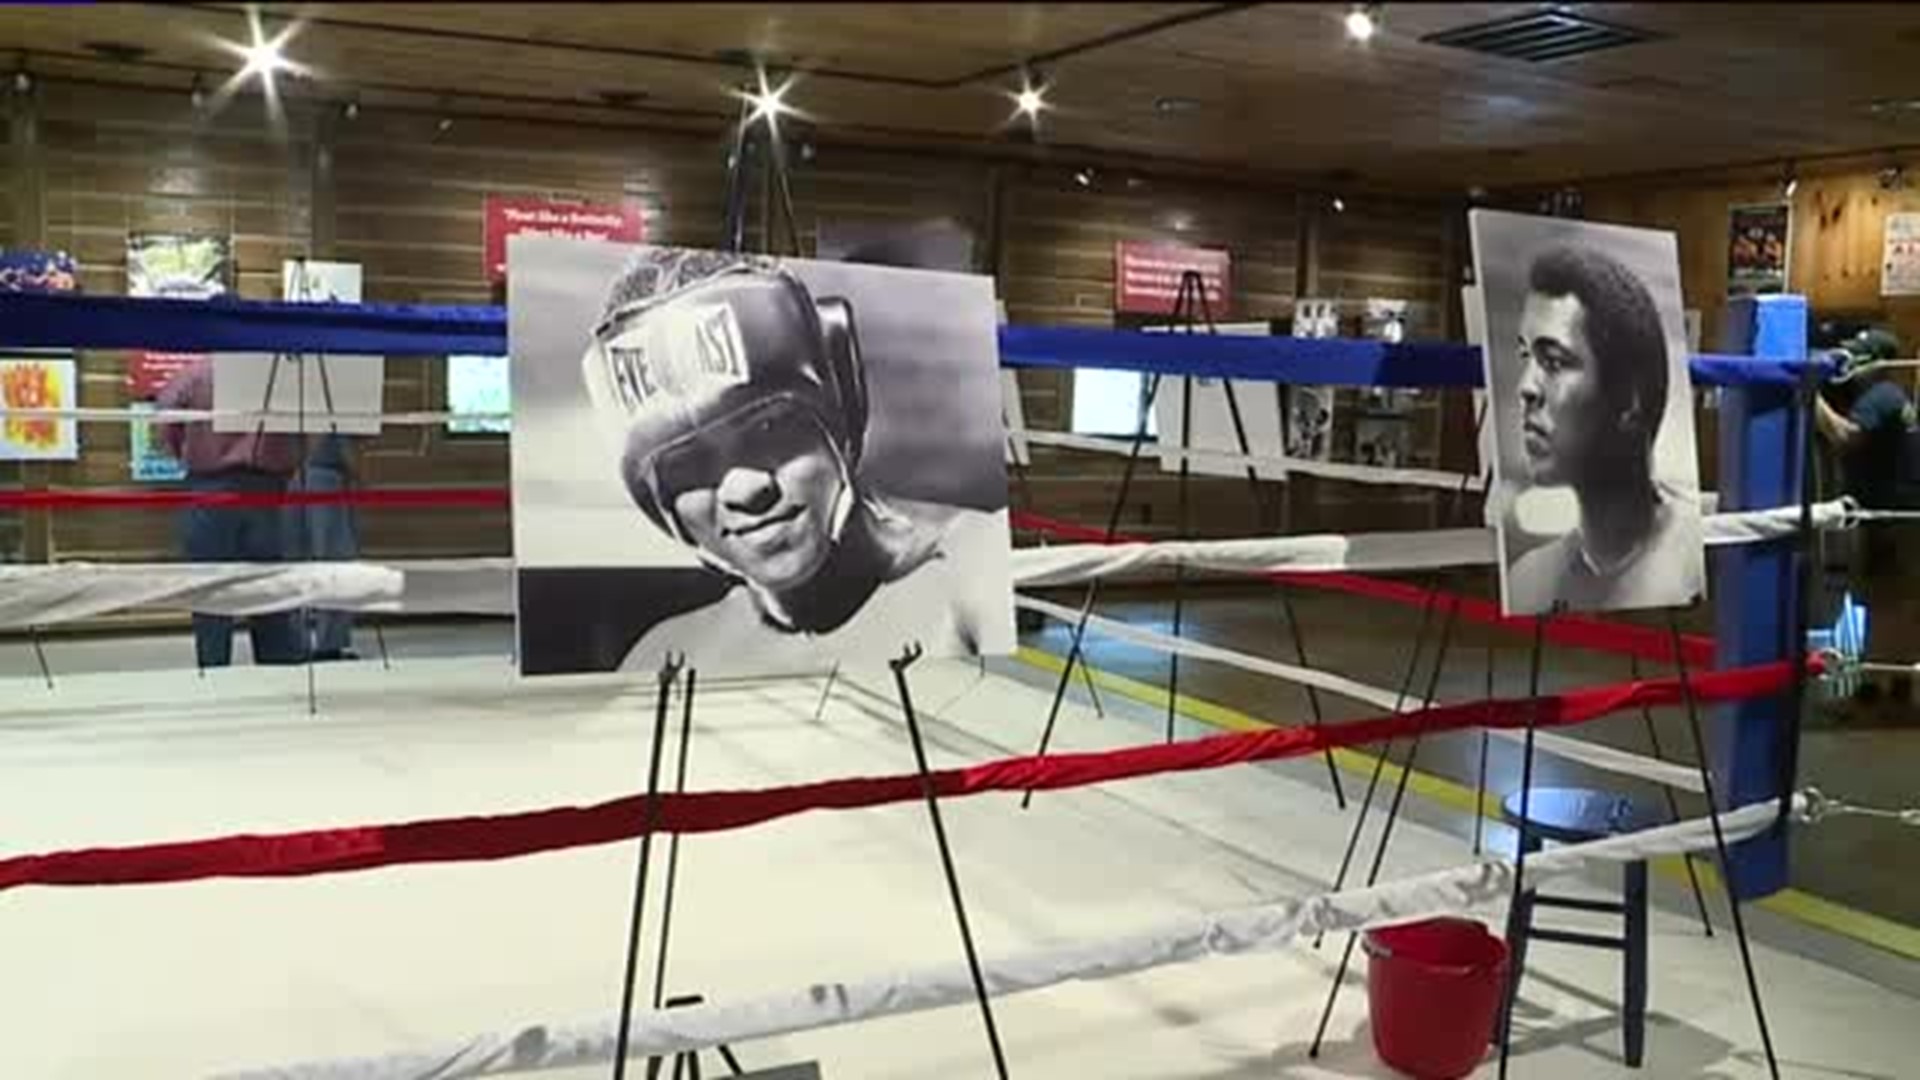 Renovations to Muhammad Ali`s Old Training Camp in Deer Lake Revealed